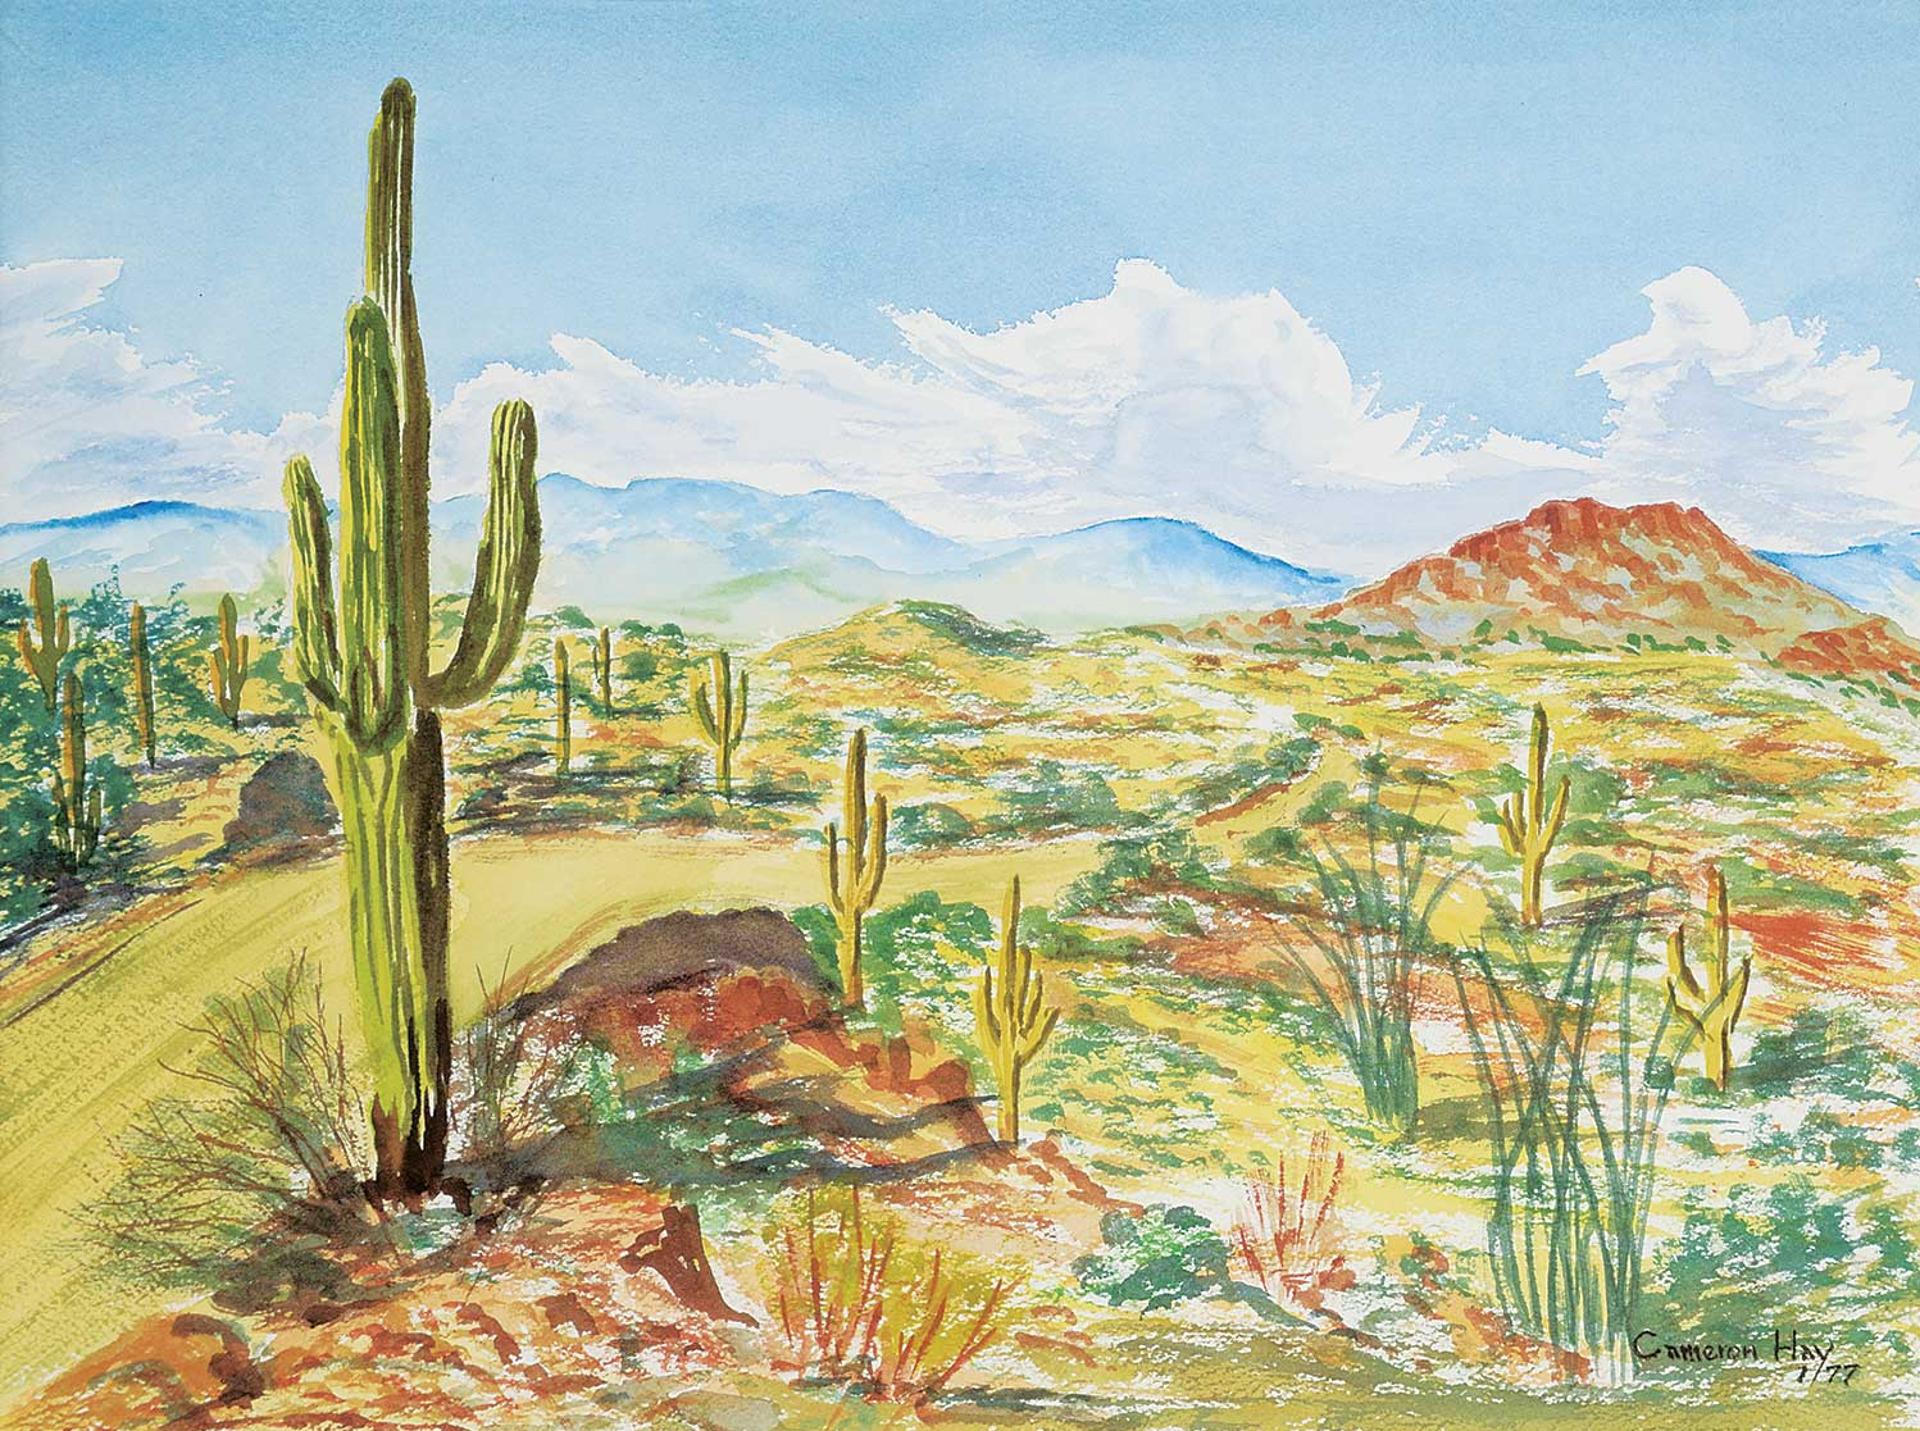 Cameron Hay - Untitled - Day in the Desert